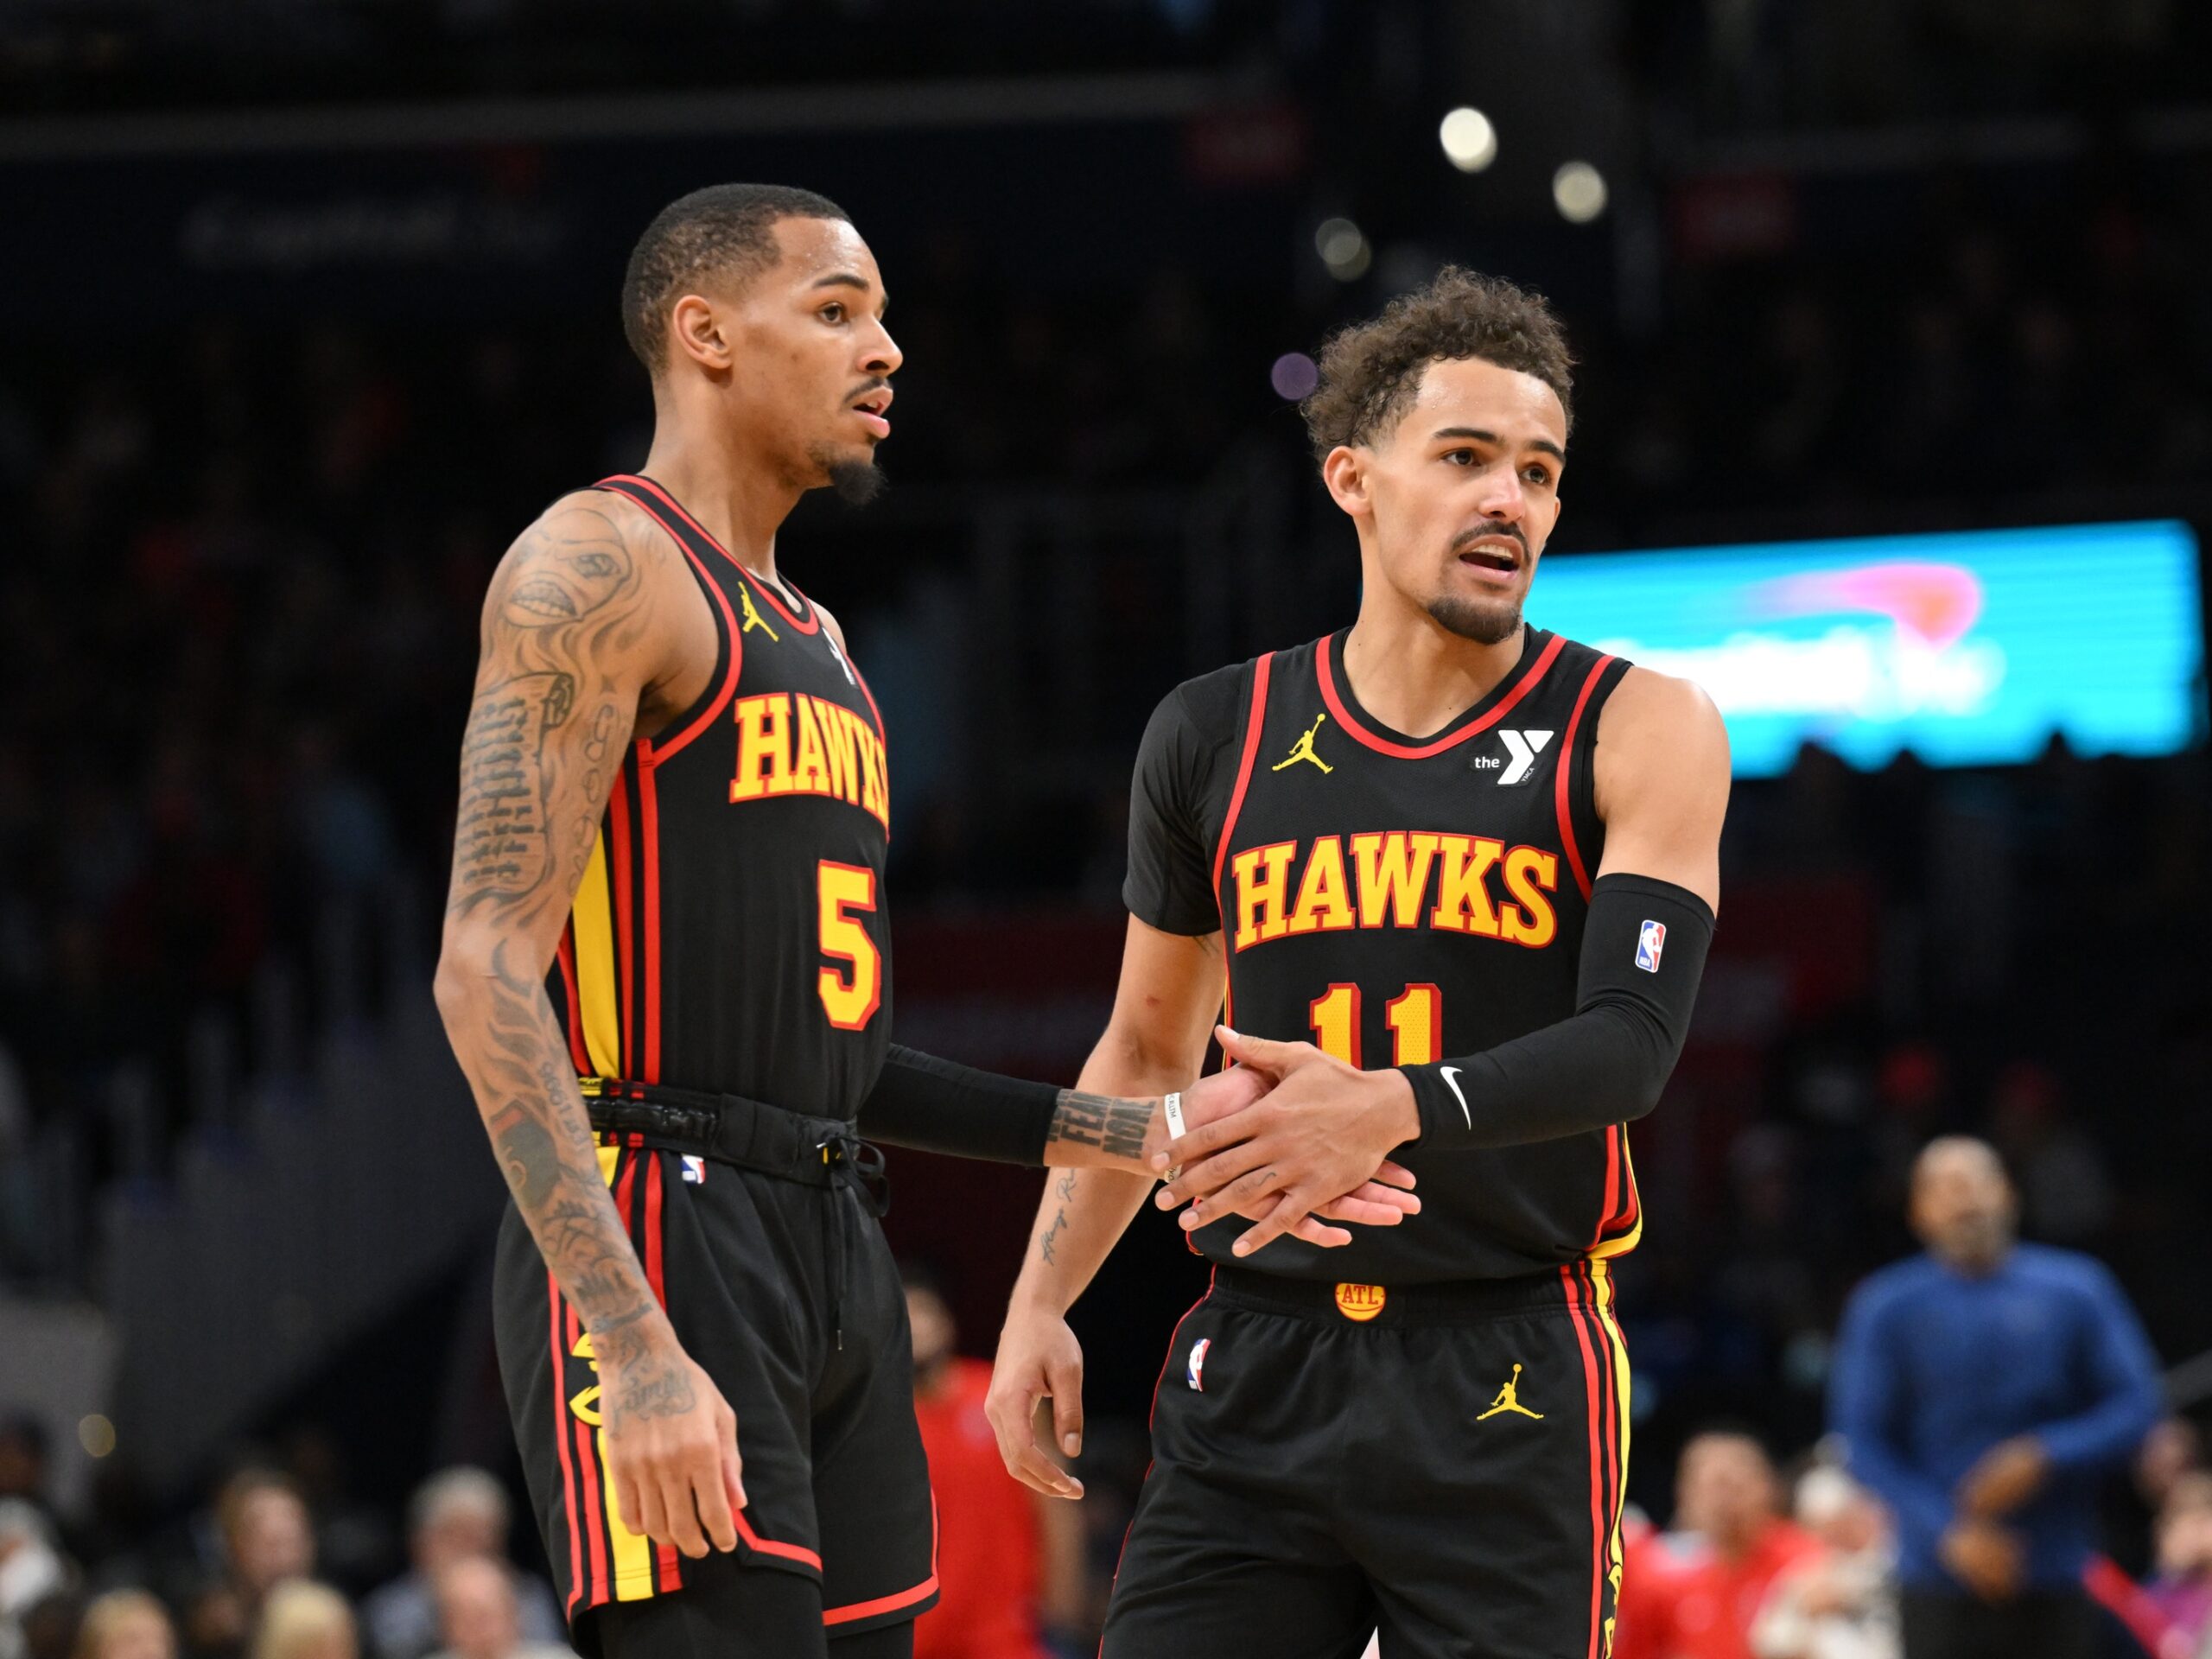 Atlanta Hawks guard Dejounte Murray (5) and guard Trae Young (11) celebrate during the second half against the Washington Wizards at Capital One Arena.